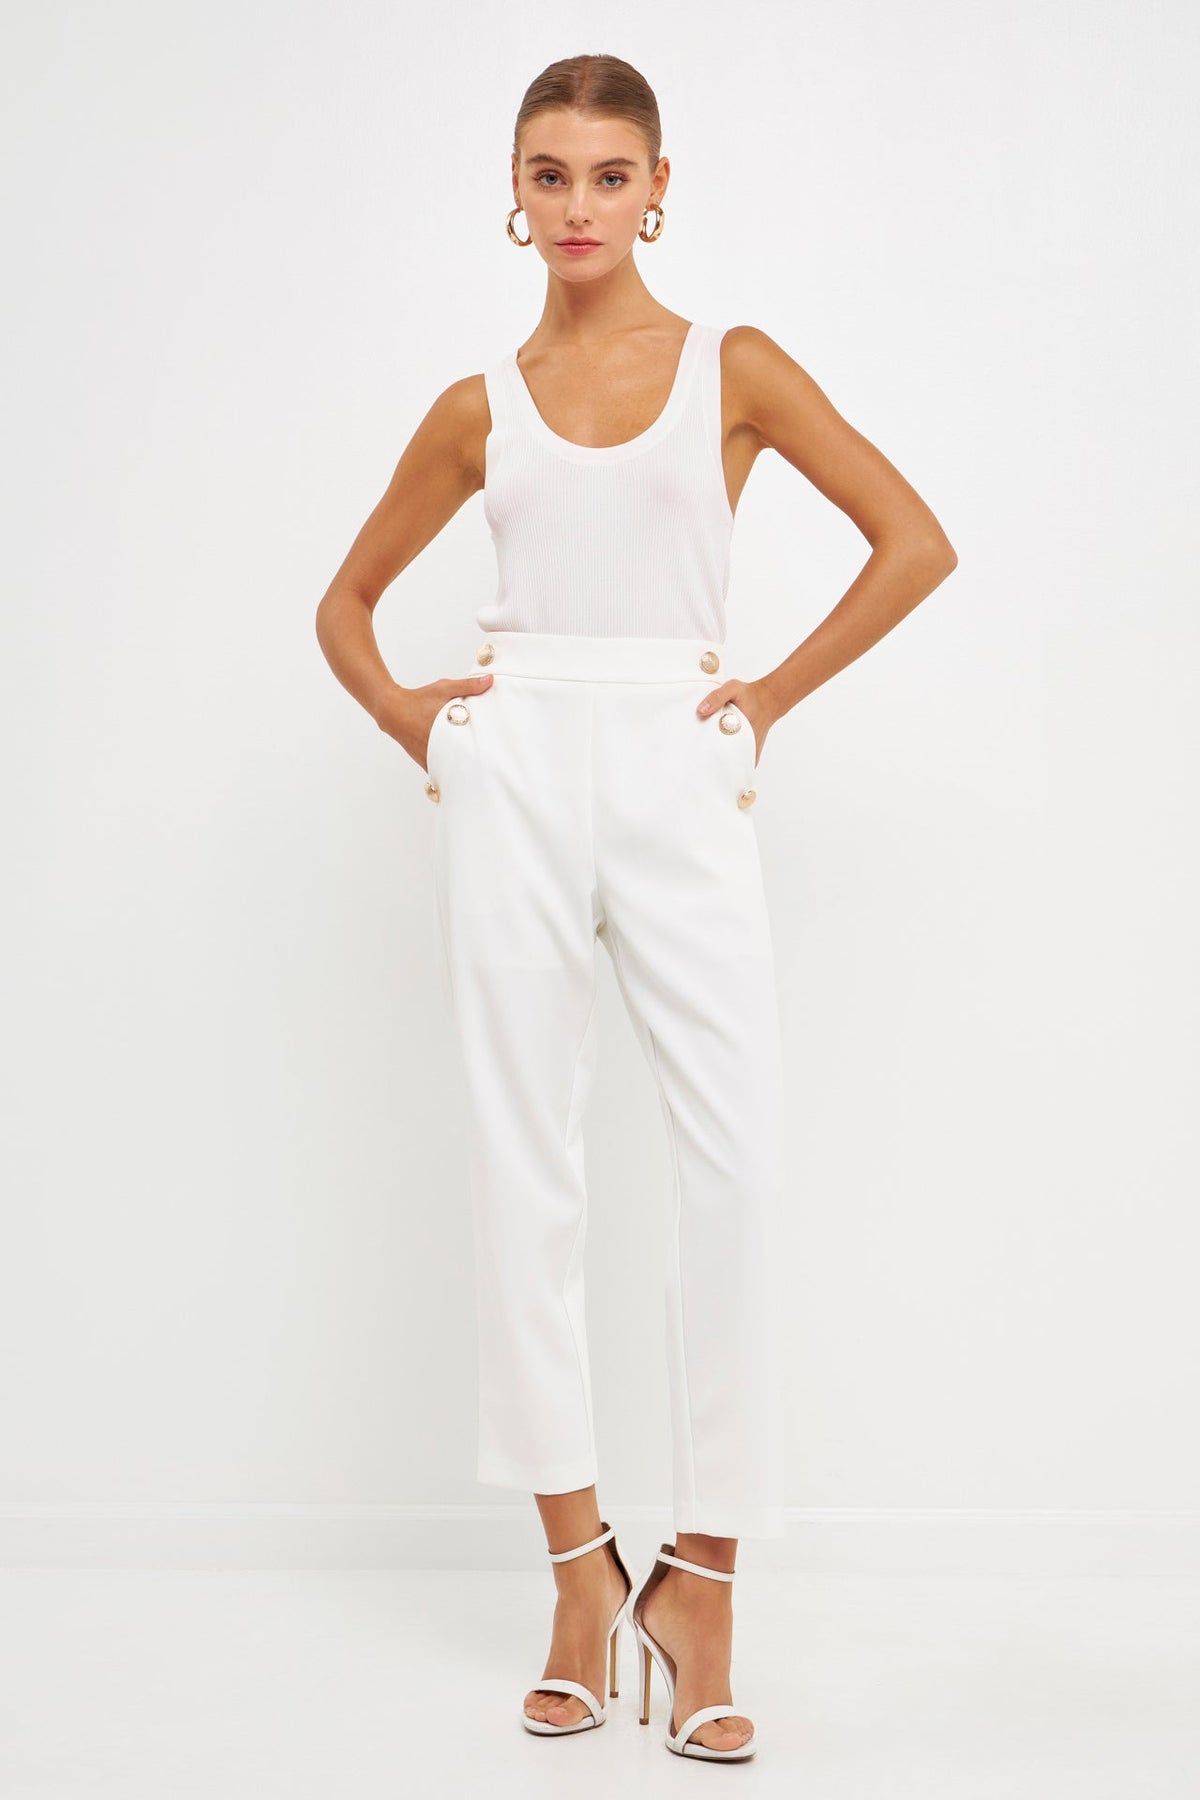 ENDLESS ROSE-High Waisted Buttoned Trousers-PANTS available at Objectrare